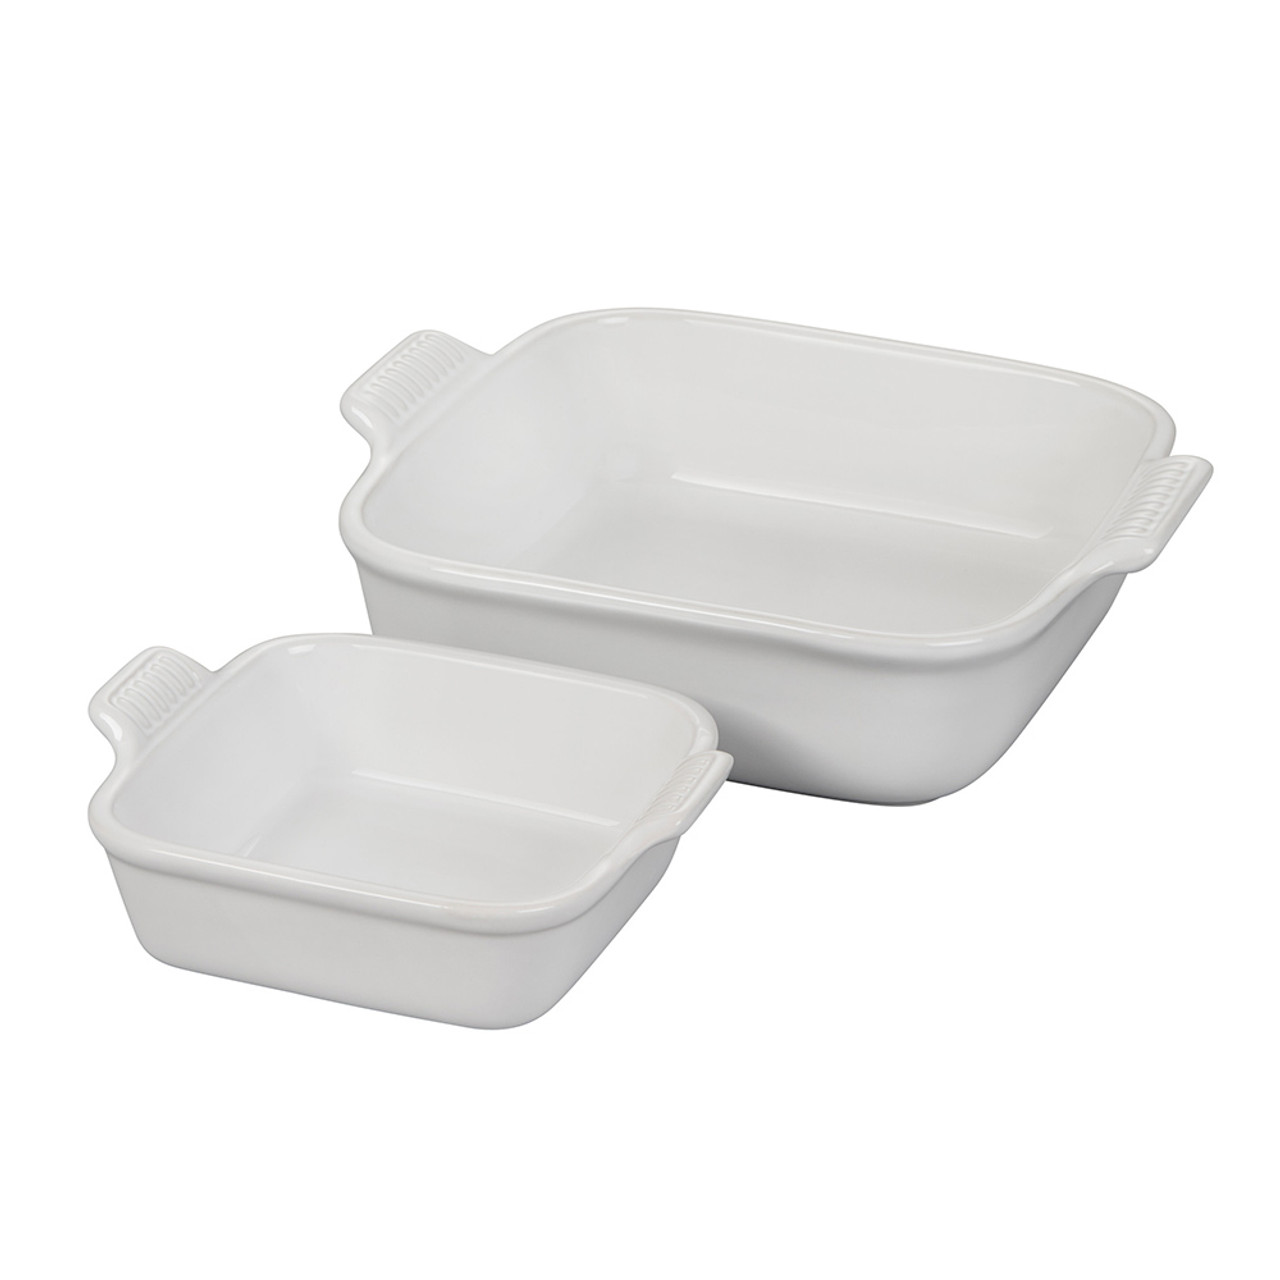 https://cdn11.bigcommerce.com/s-hccytny0od/images/stencil/1280x1280/products/3432/12343/le-creuset-heritage-square-baking-dish-set-white__86800.1596497548.jpg?c=2?imbypass=on